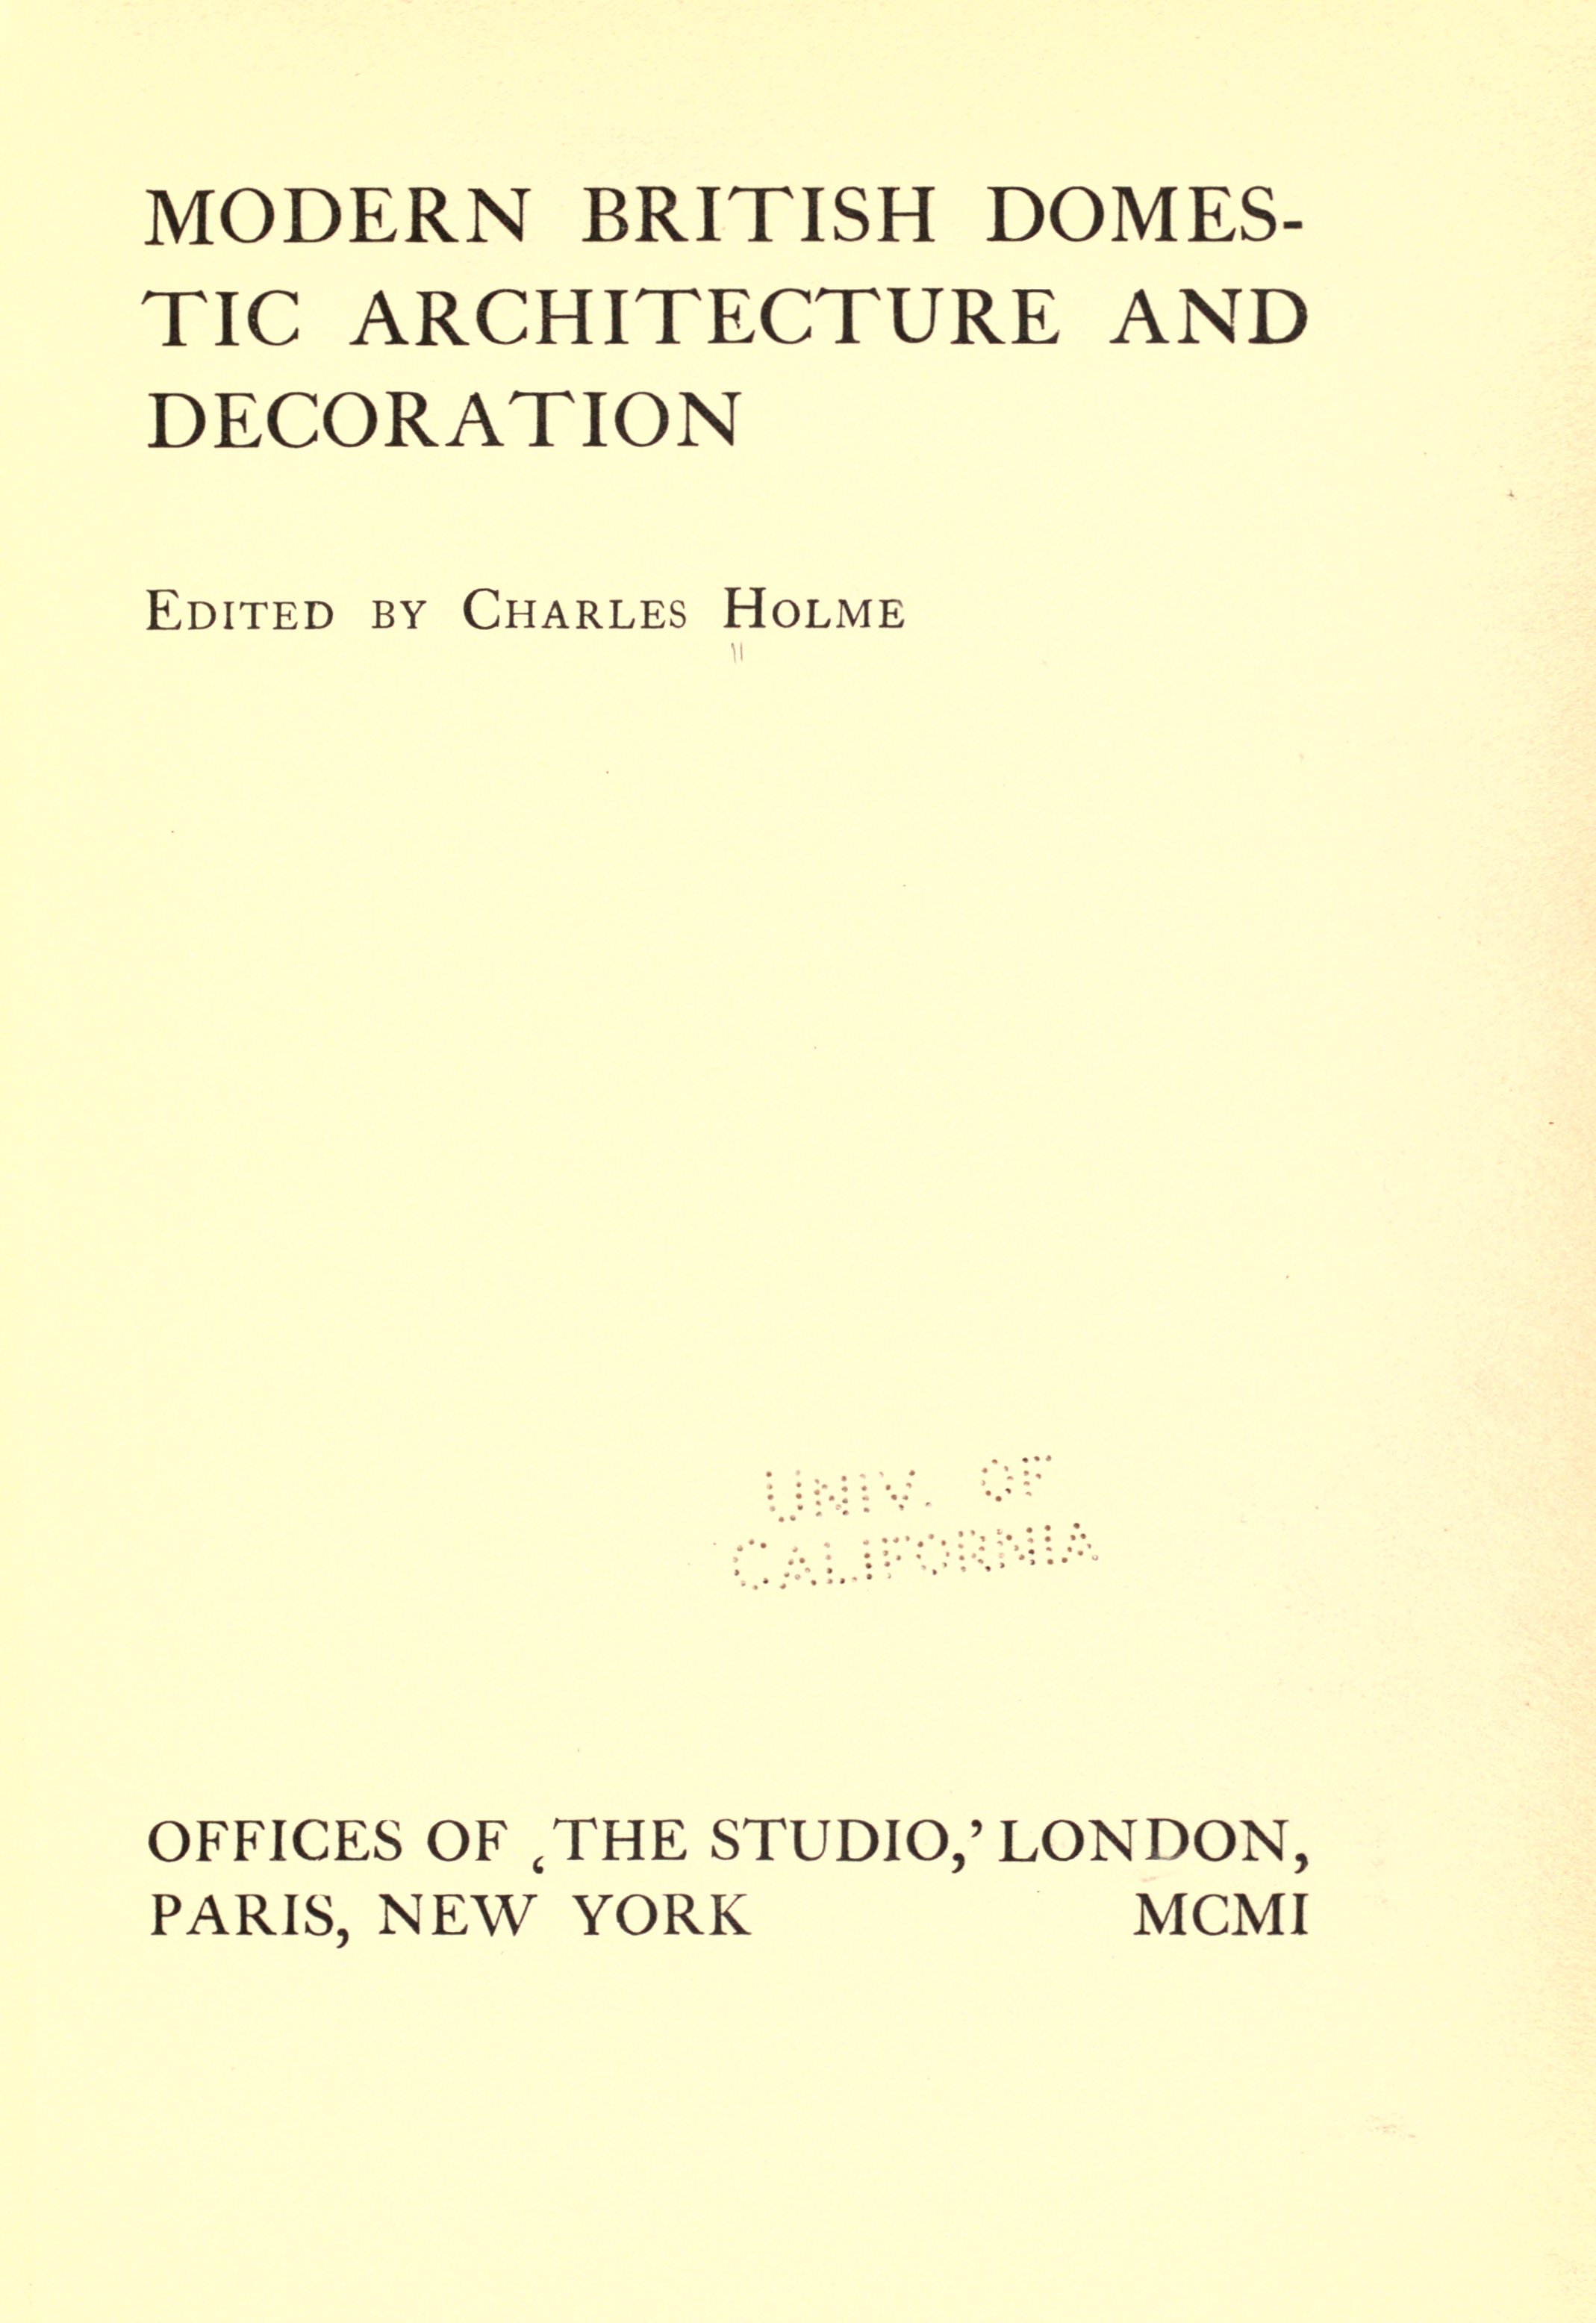 Modern British domestic architecture and decoration : Special Summer number of 'The Studio' A.D. 1901 / Edited by Charles Holme. — London : The Studio, 1901